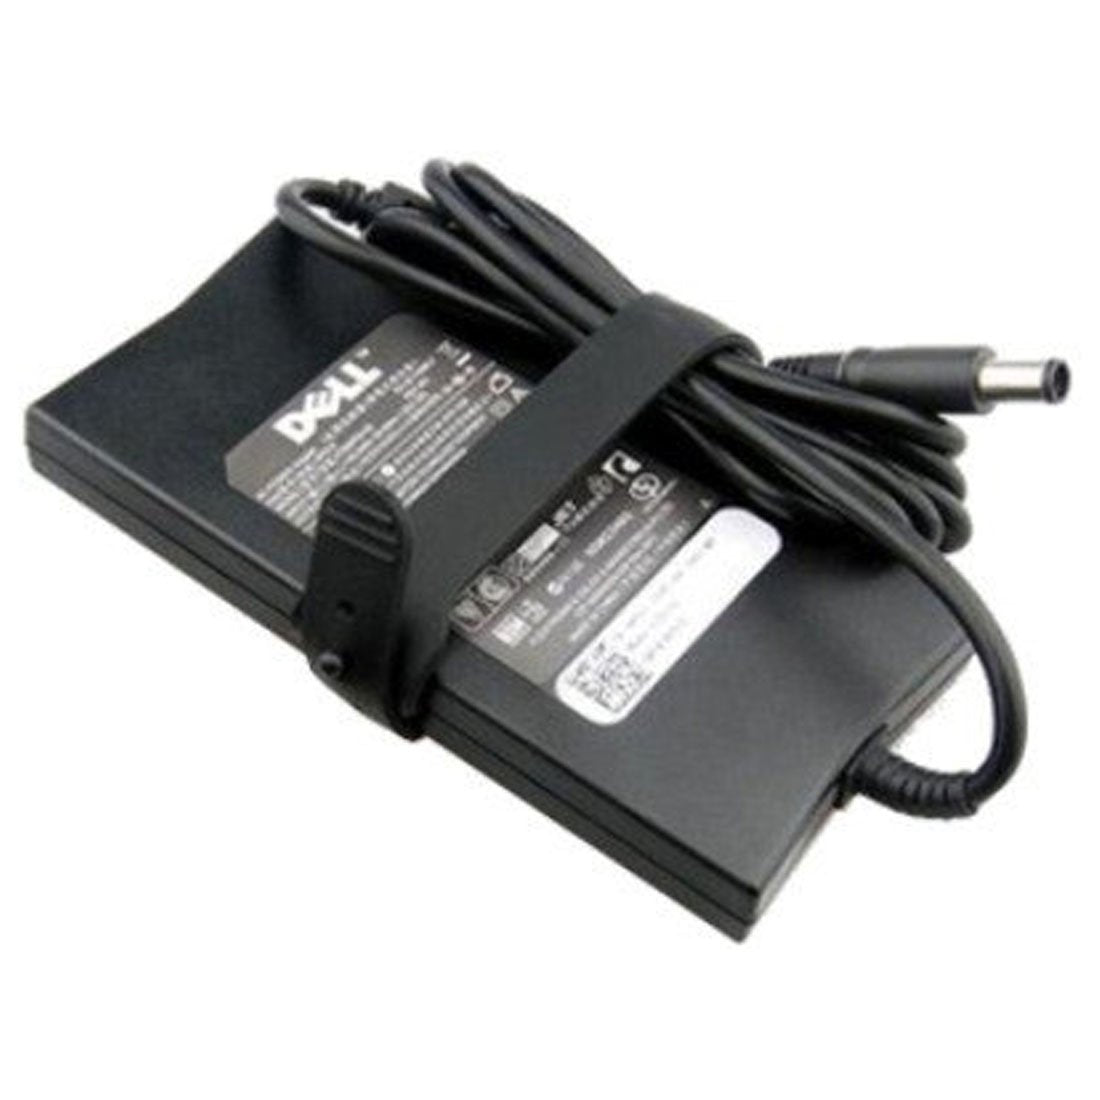 Dell Original 130W 19.5V 7.4mm Pin Laptop Charger Adapter for XPS M170 With Power Cord